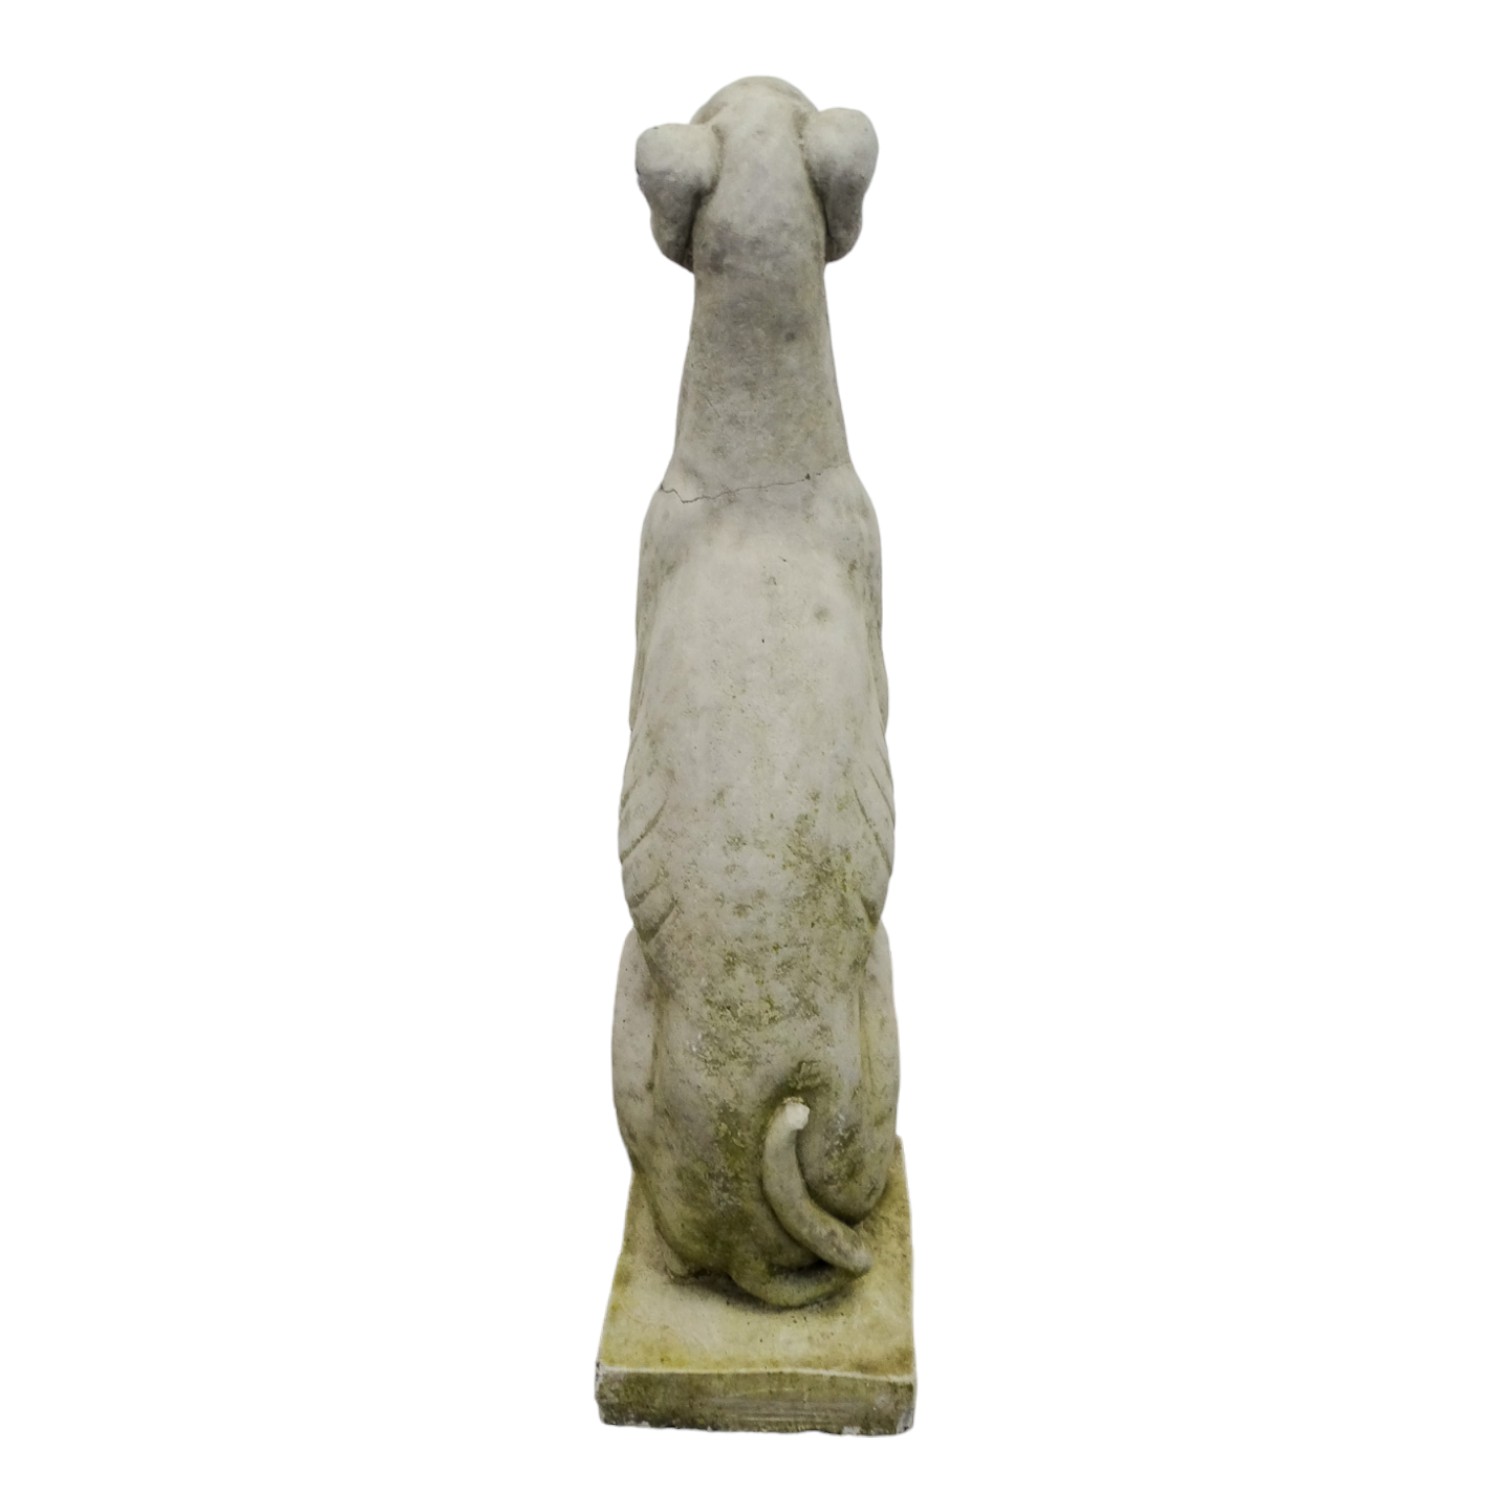 Pair of reconstituted stone dogs - seated alert pose, 55cm high - Image 8 of 10